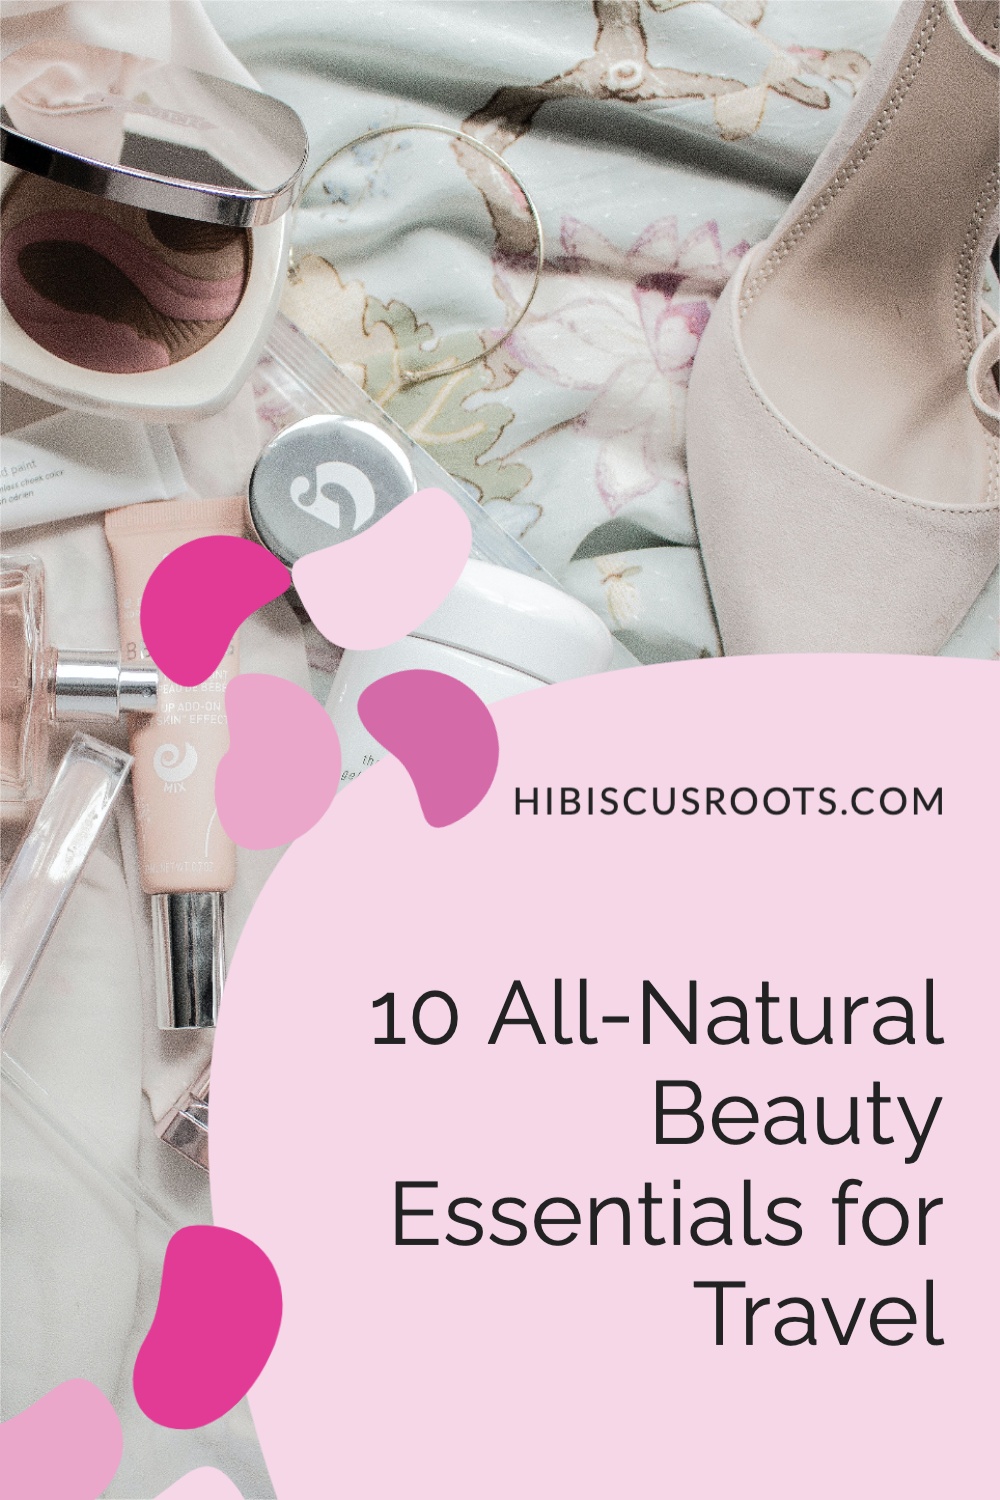 10 All-Natural Beauty Essentials for Travel